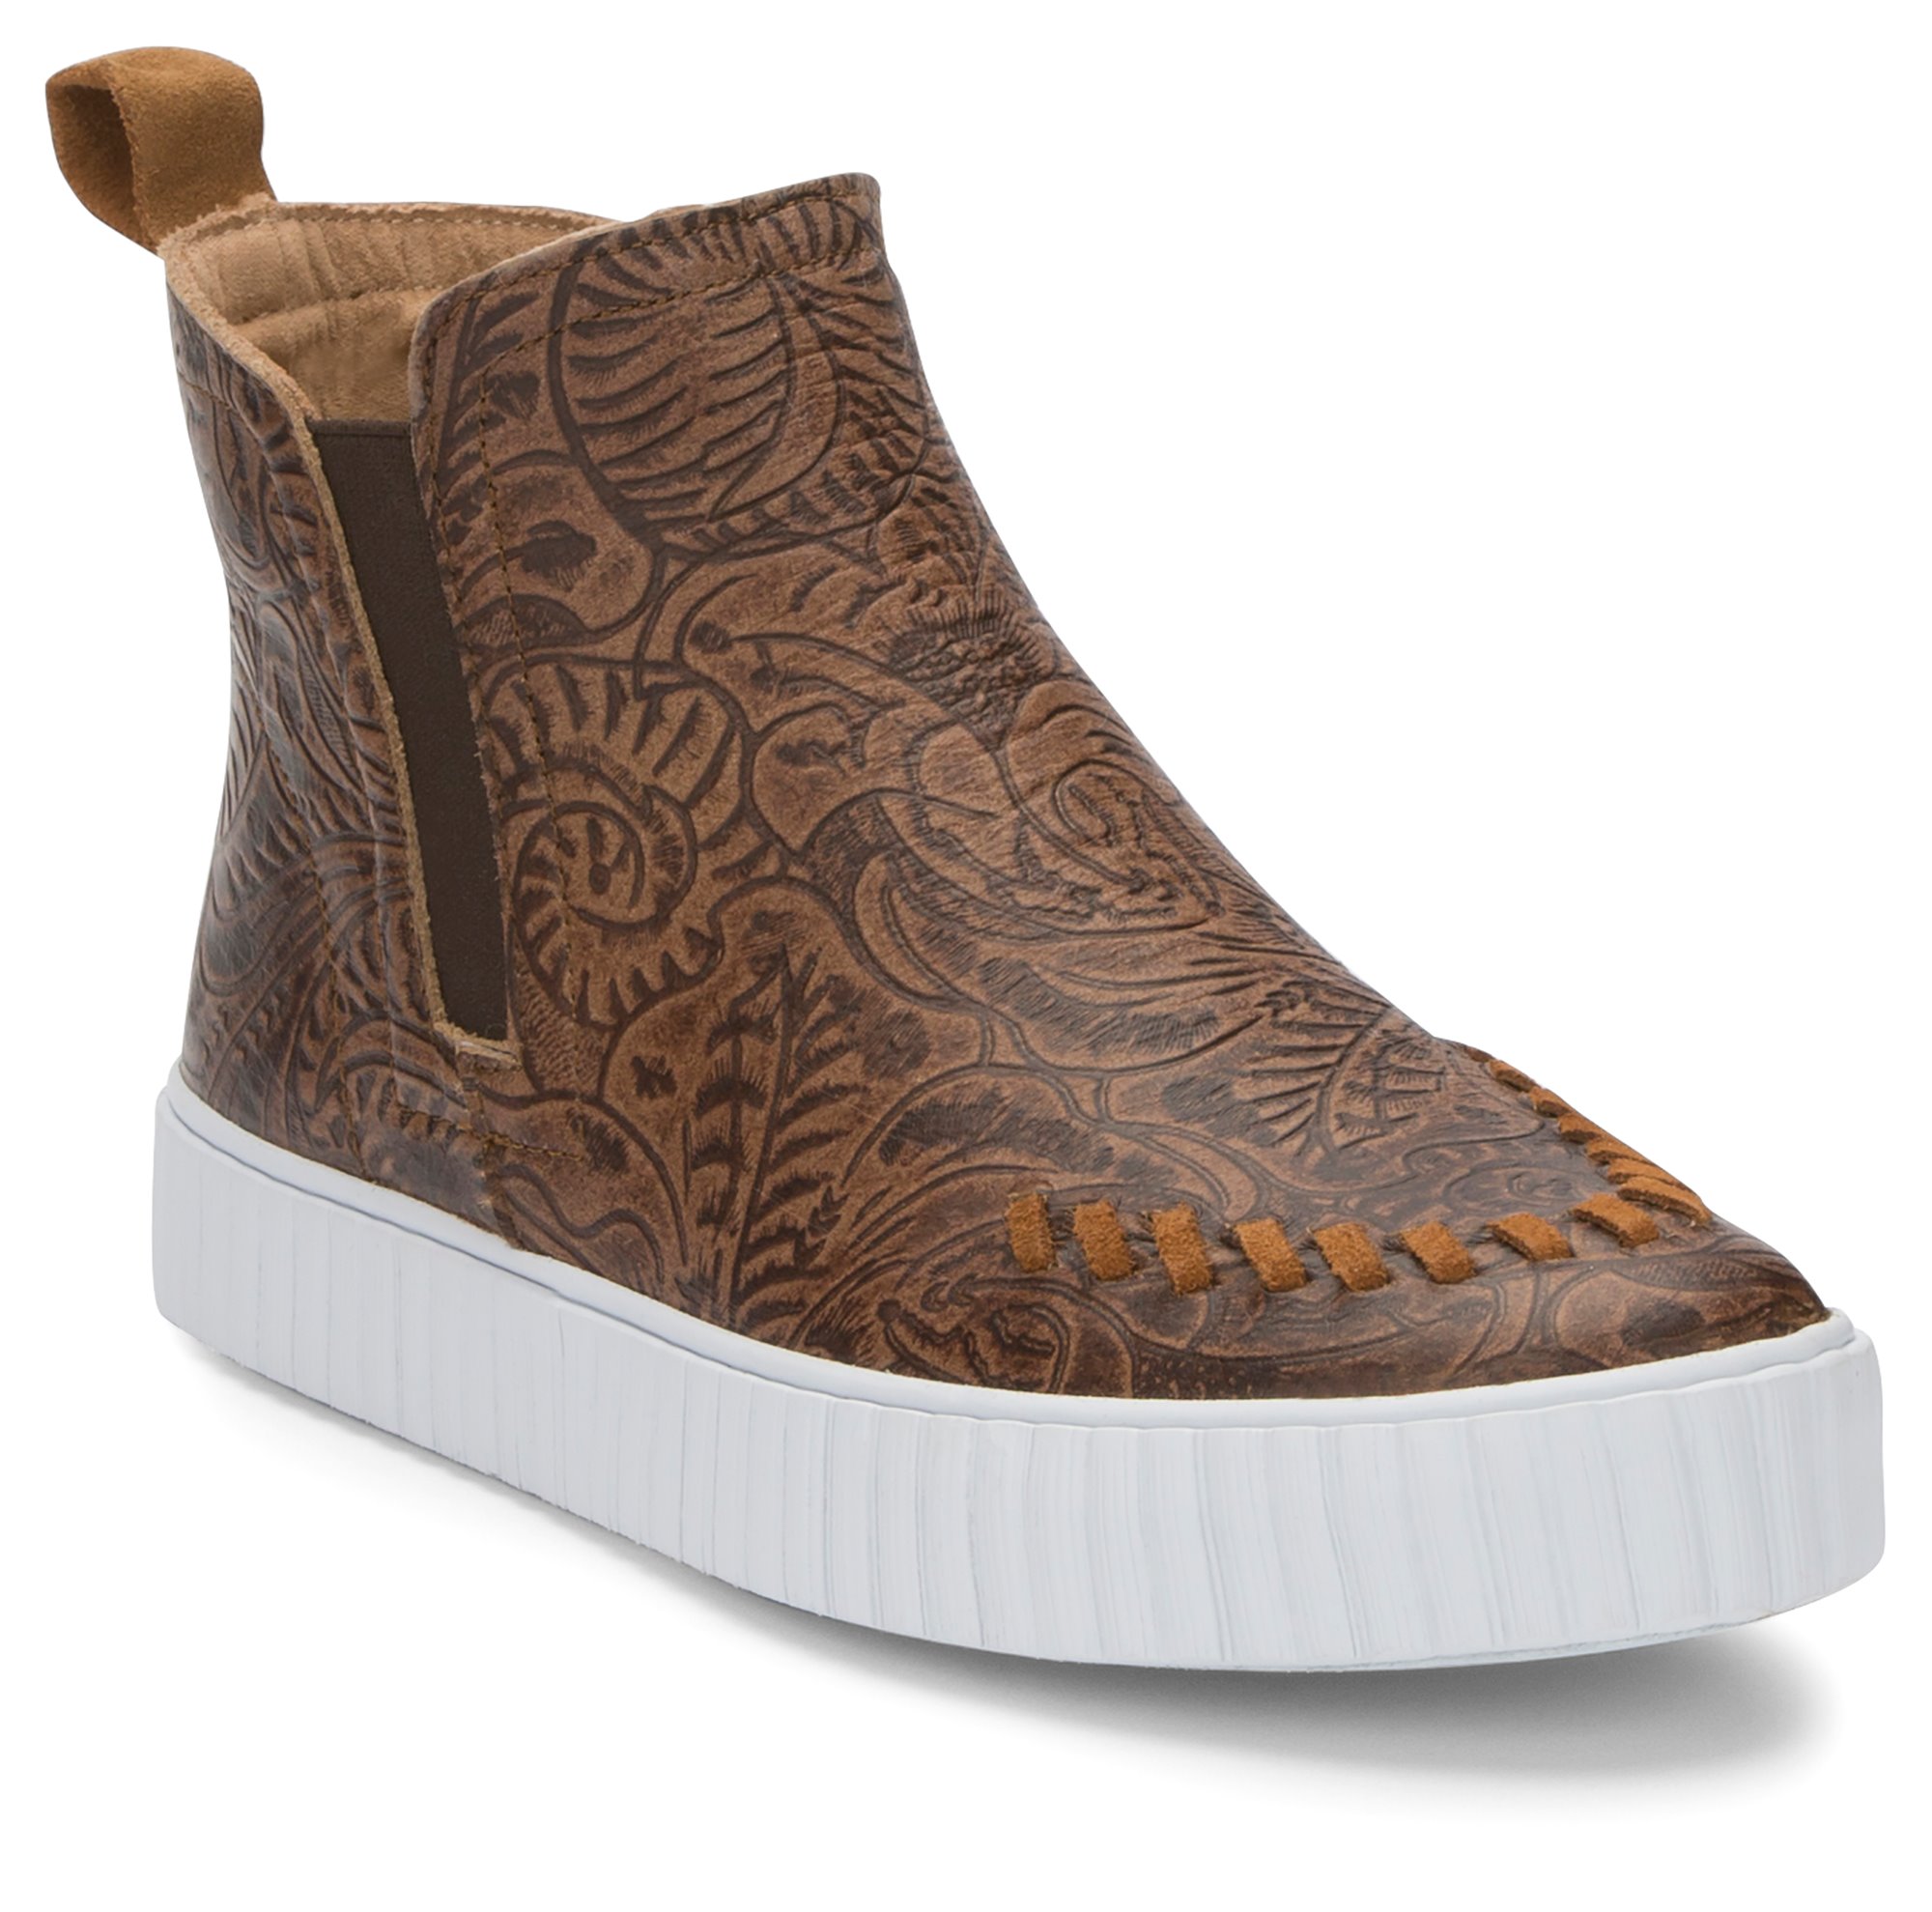 justin boots wedge sole